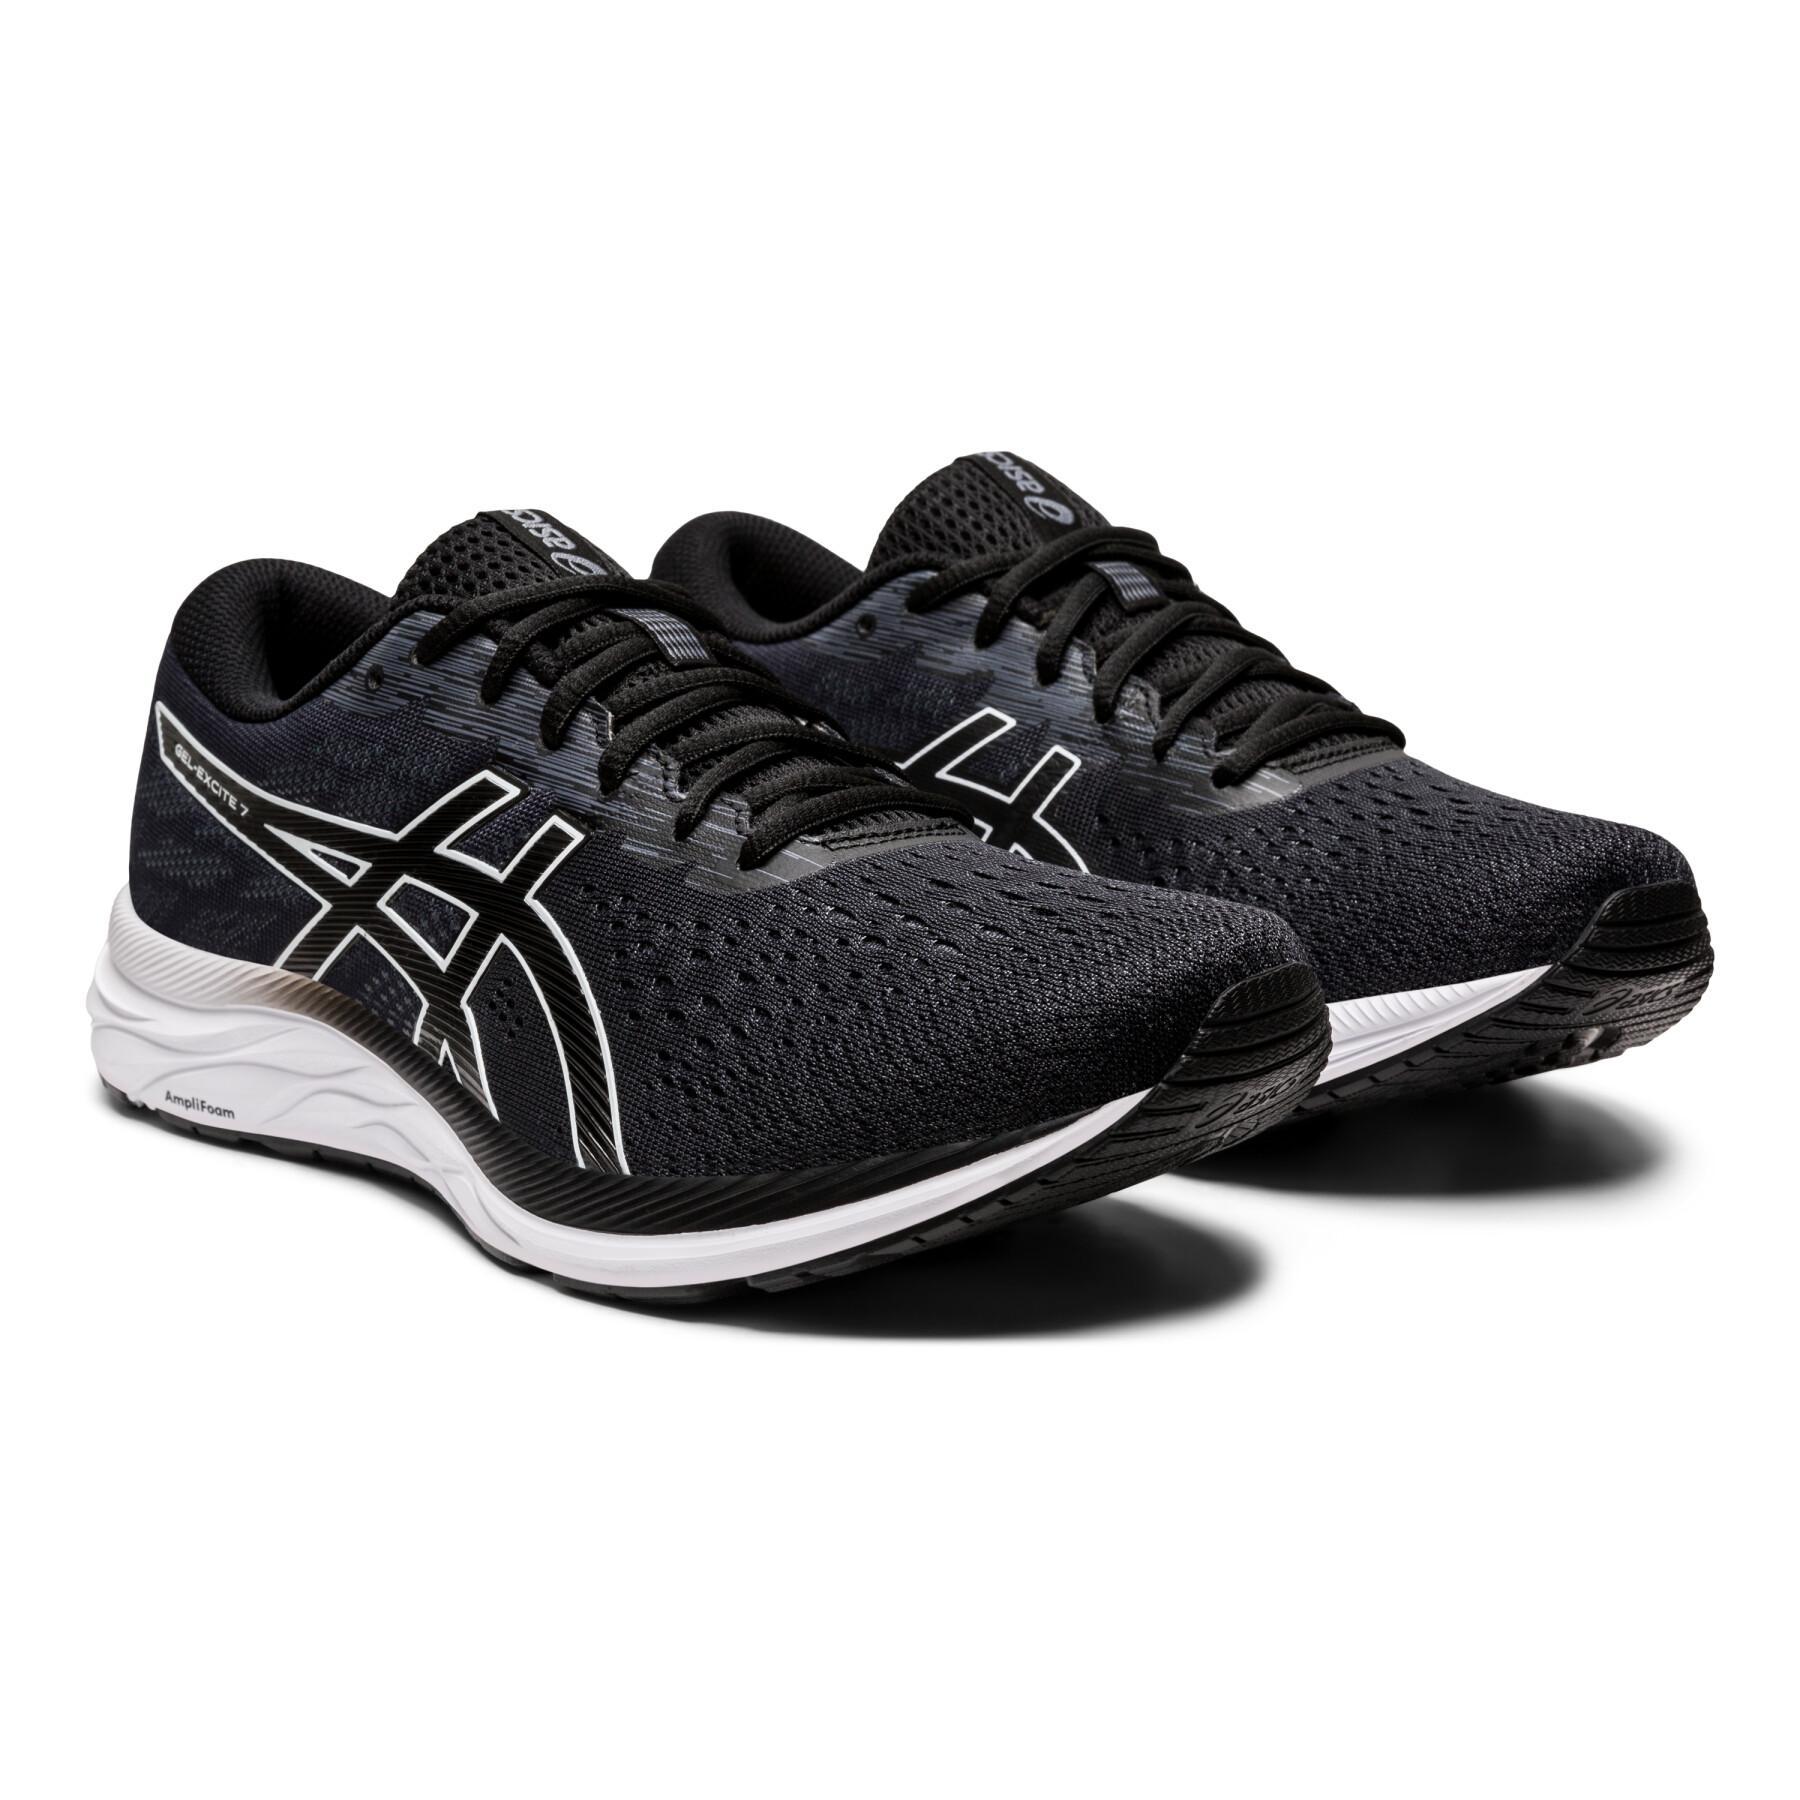 Shoes Asics Gel-Excite 7